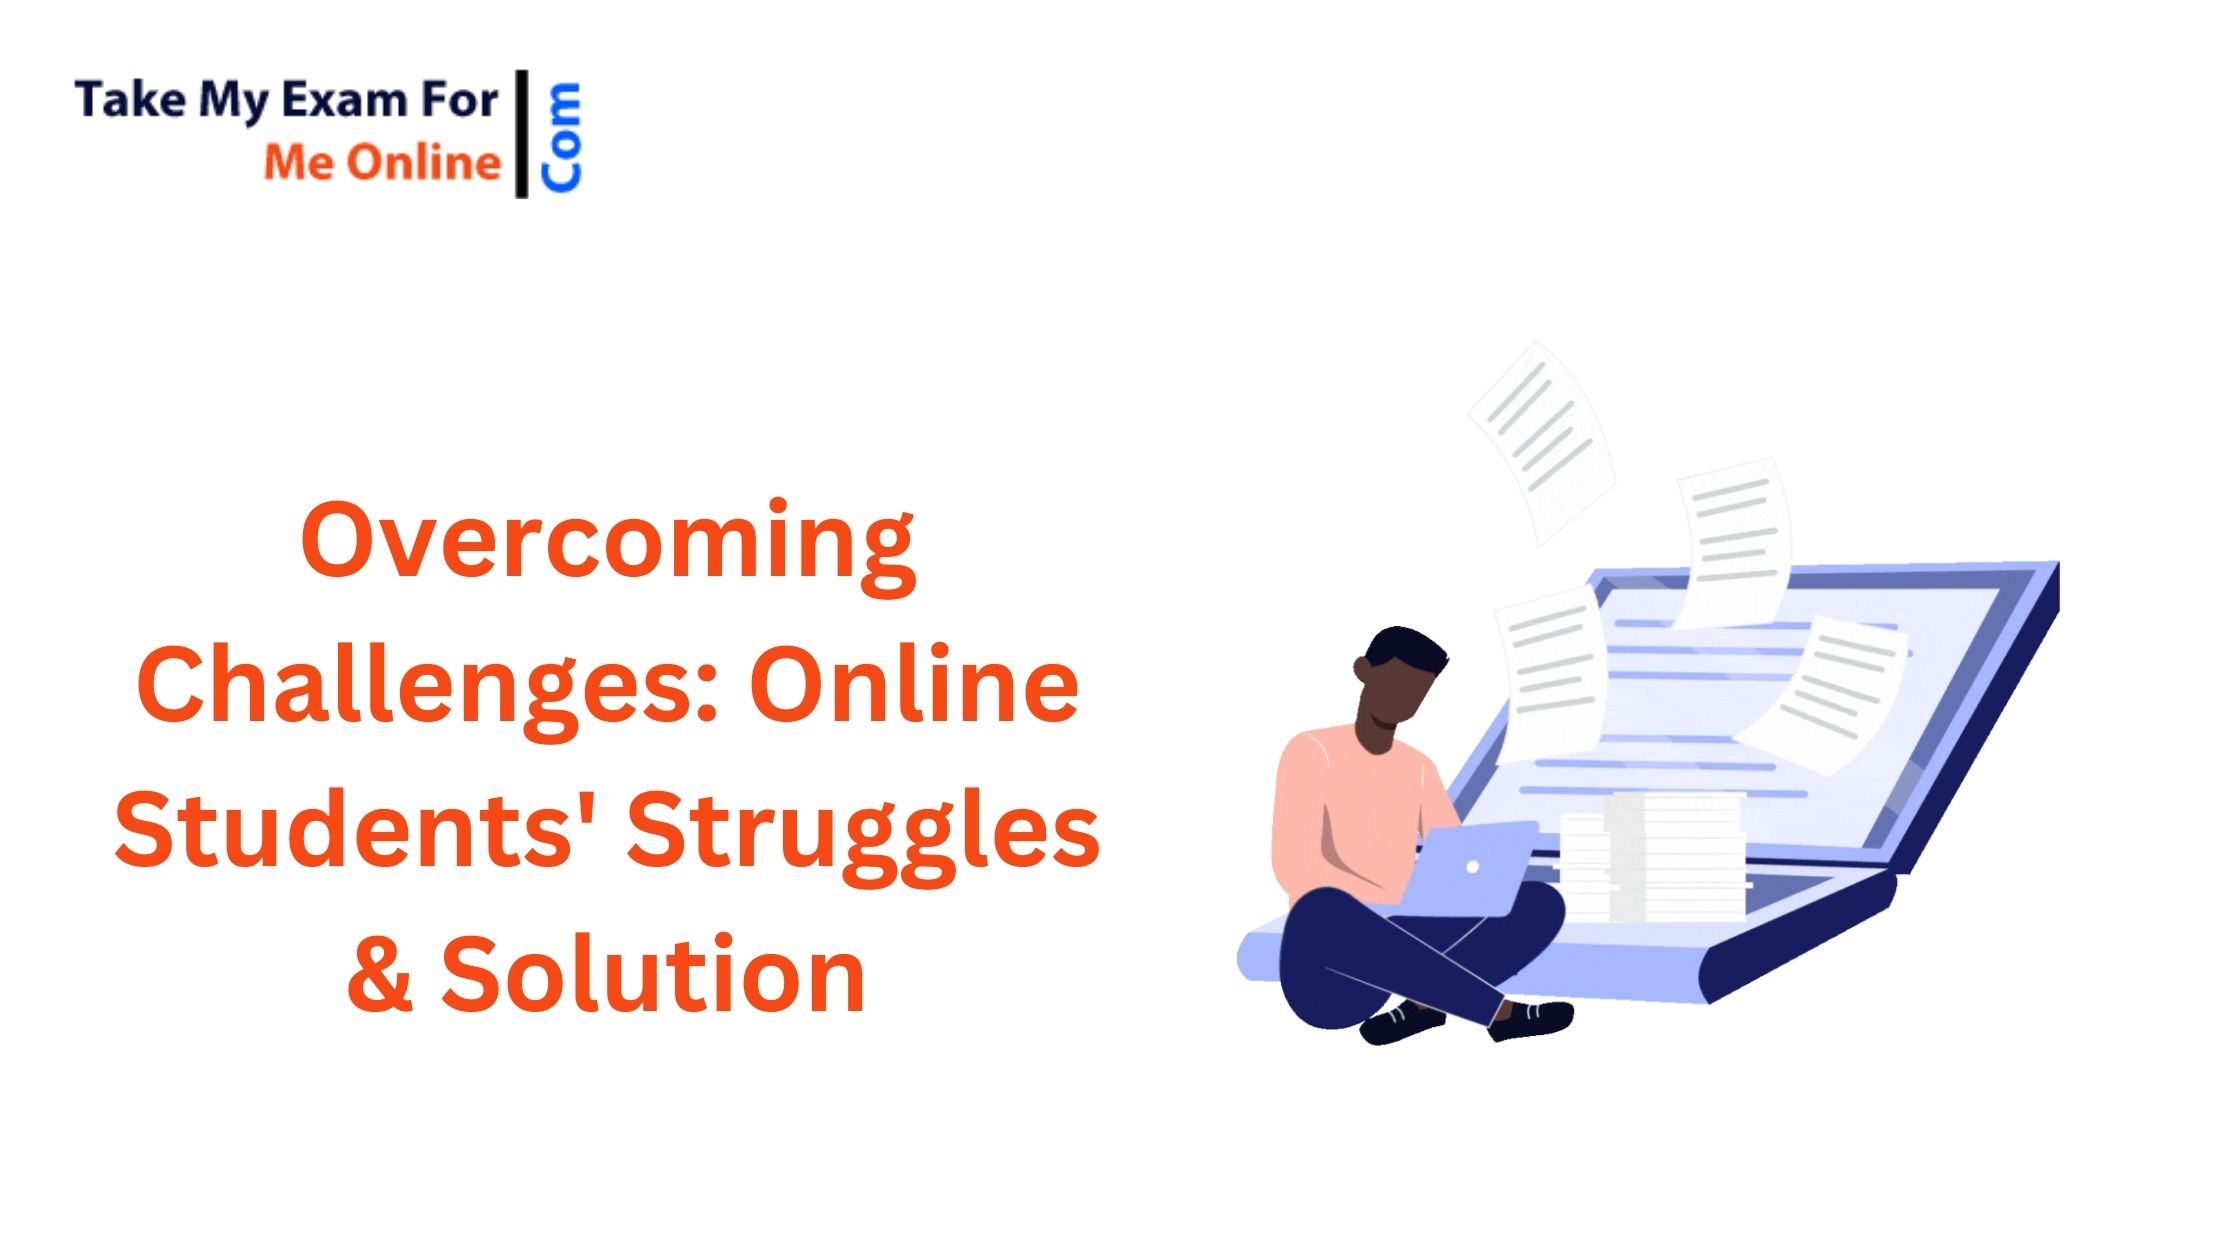 Overcoming Challenges: Online Students' Struggles & Solution